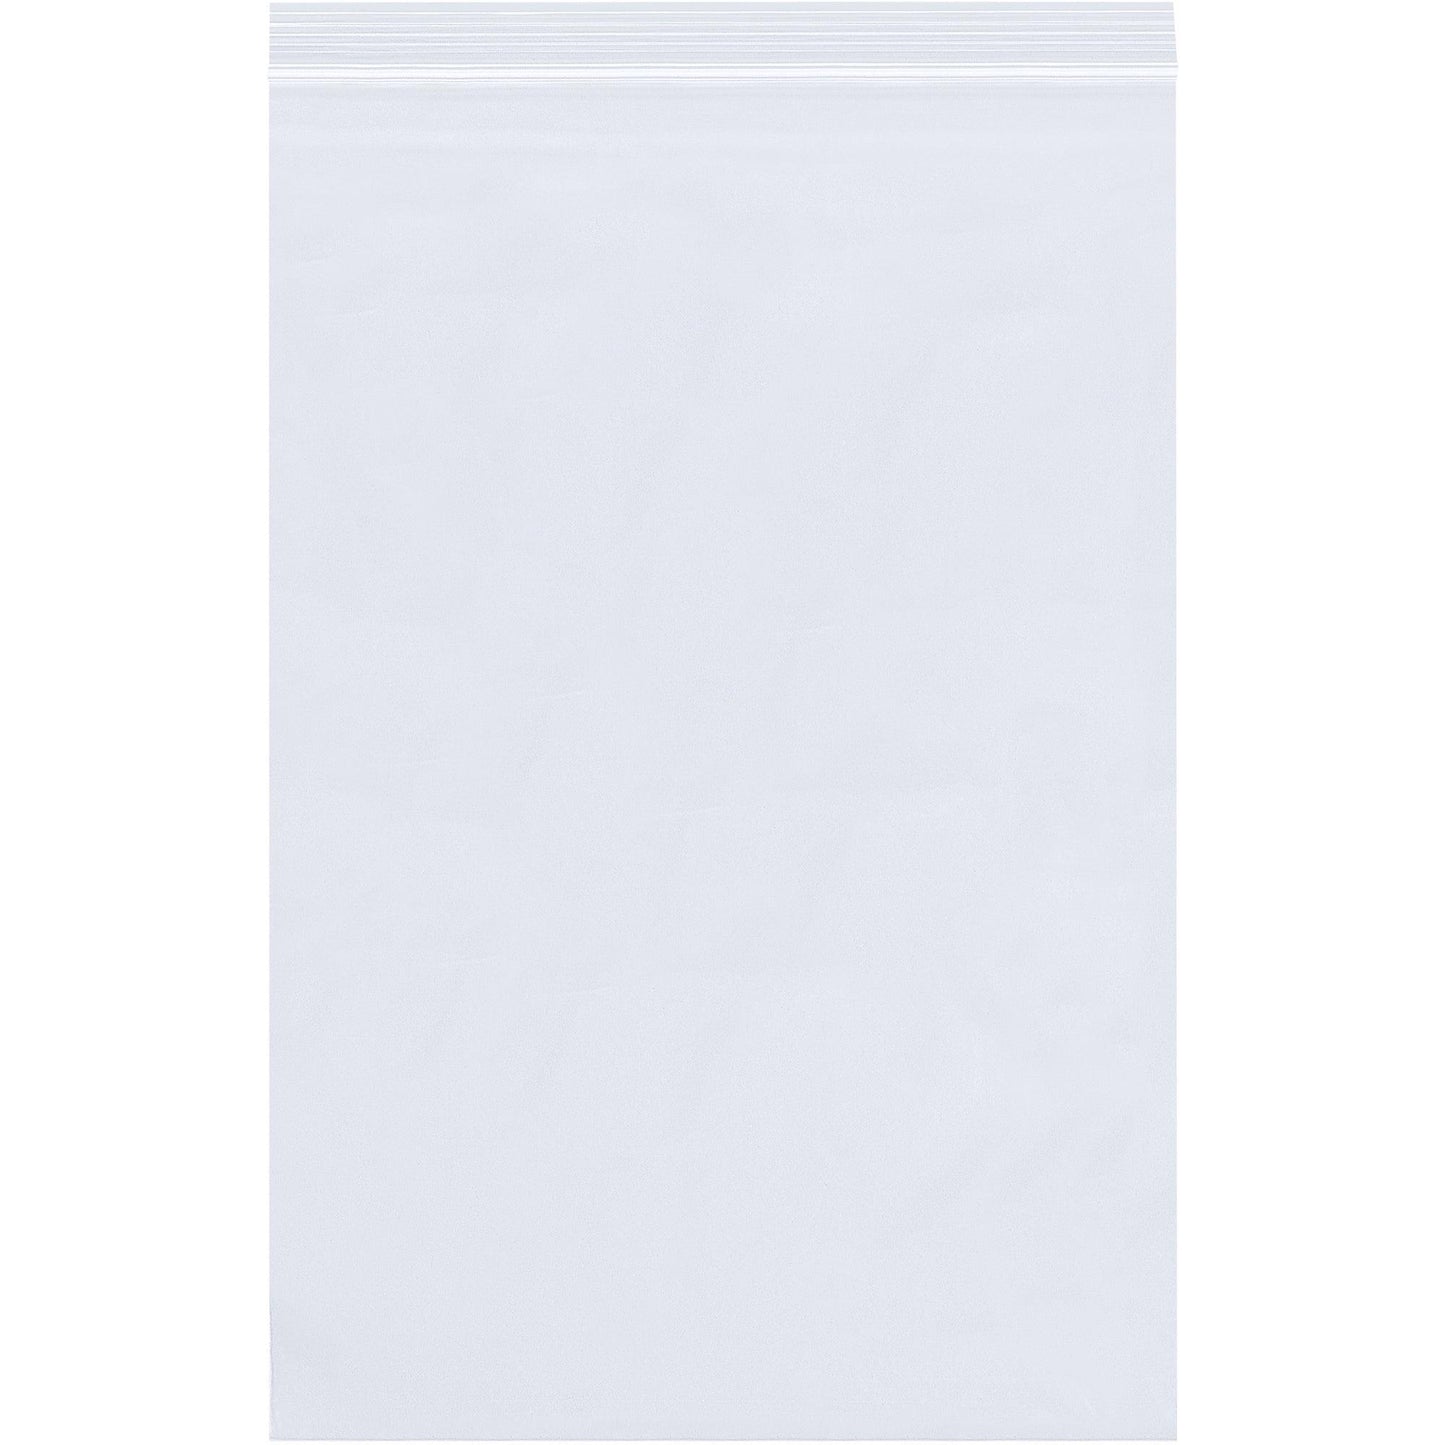 28 x 30" - 8 Mil Reclosable Poly Bags - PB3928